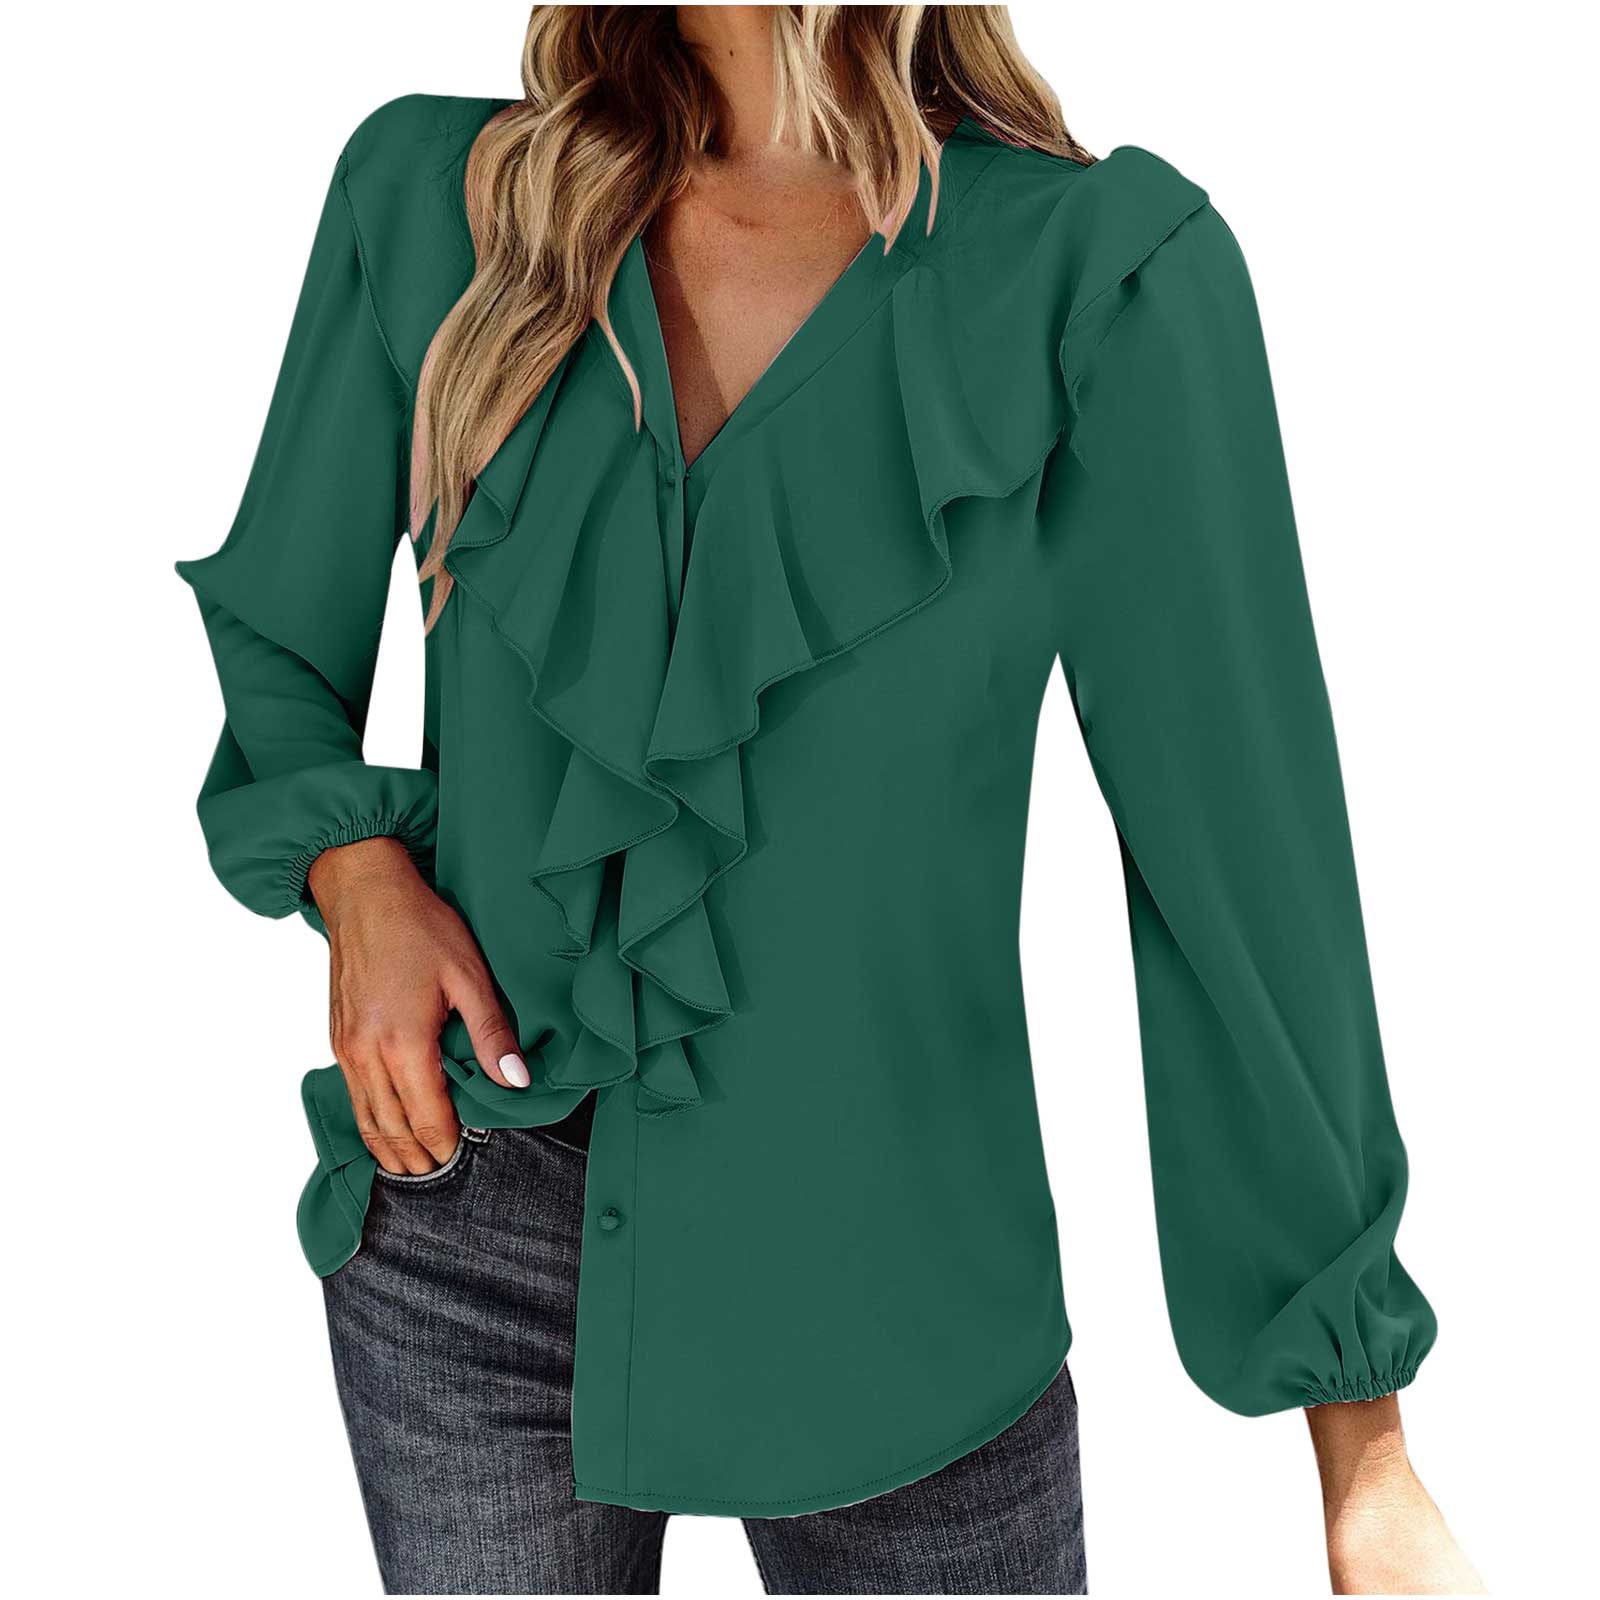 Buy Theshy_Women Tops Women's Long Sleeve Plus Size Loose Casual Pocket  Button Tops Shirt Blouse Clearance,Green,XL,Polyester at